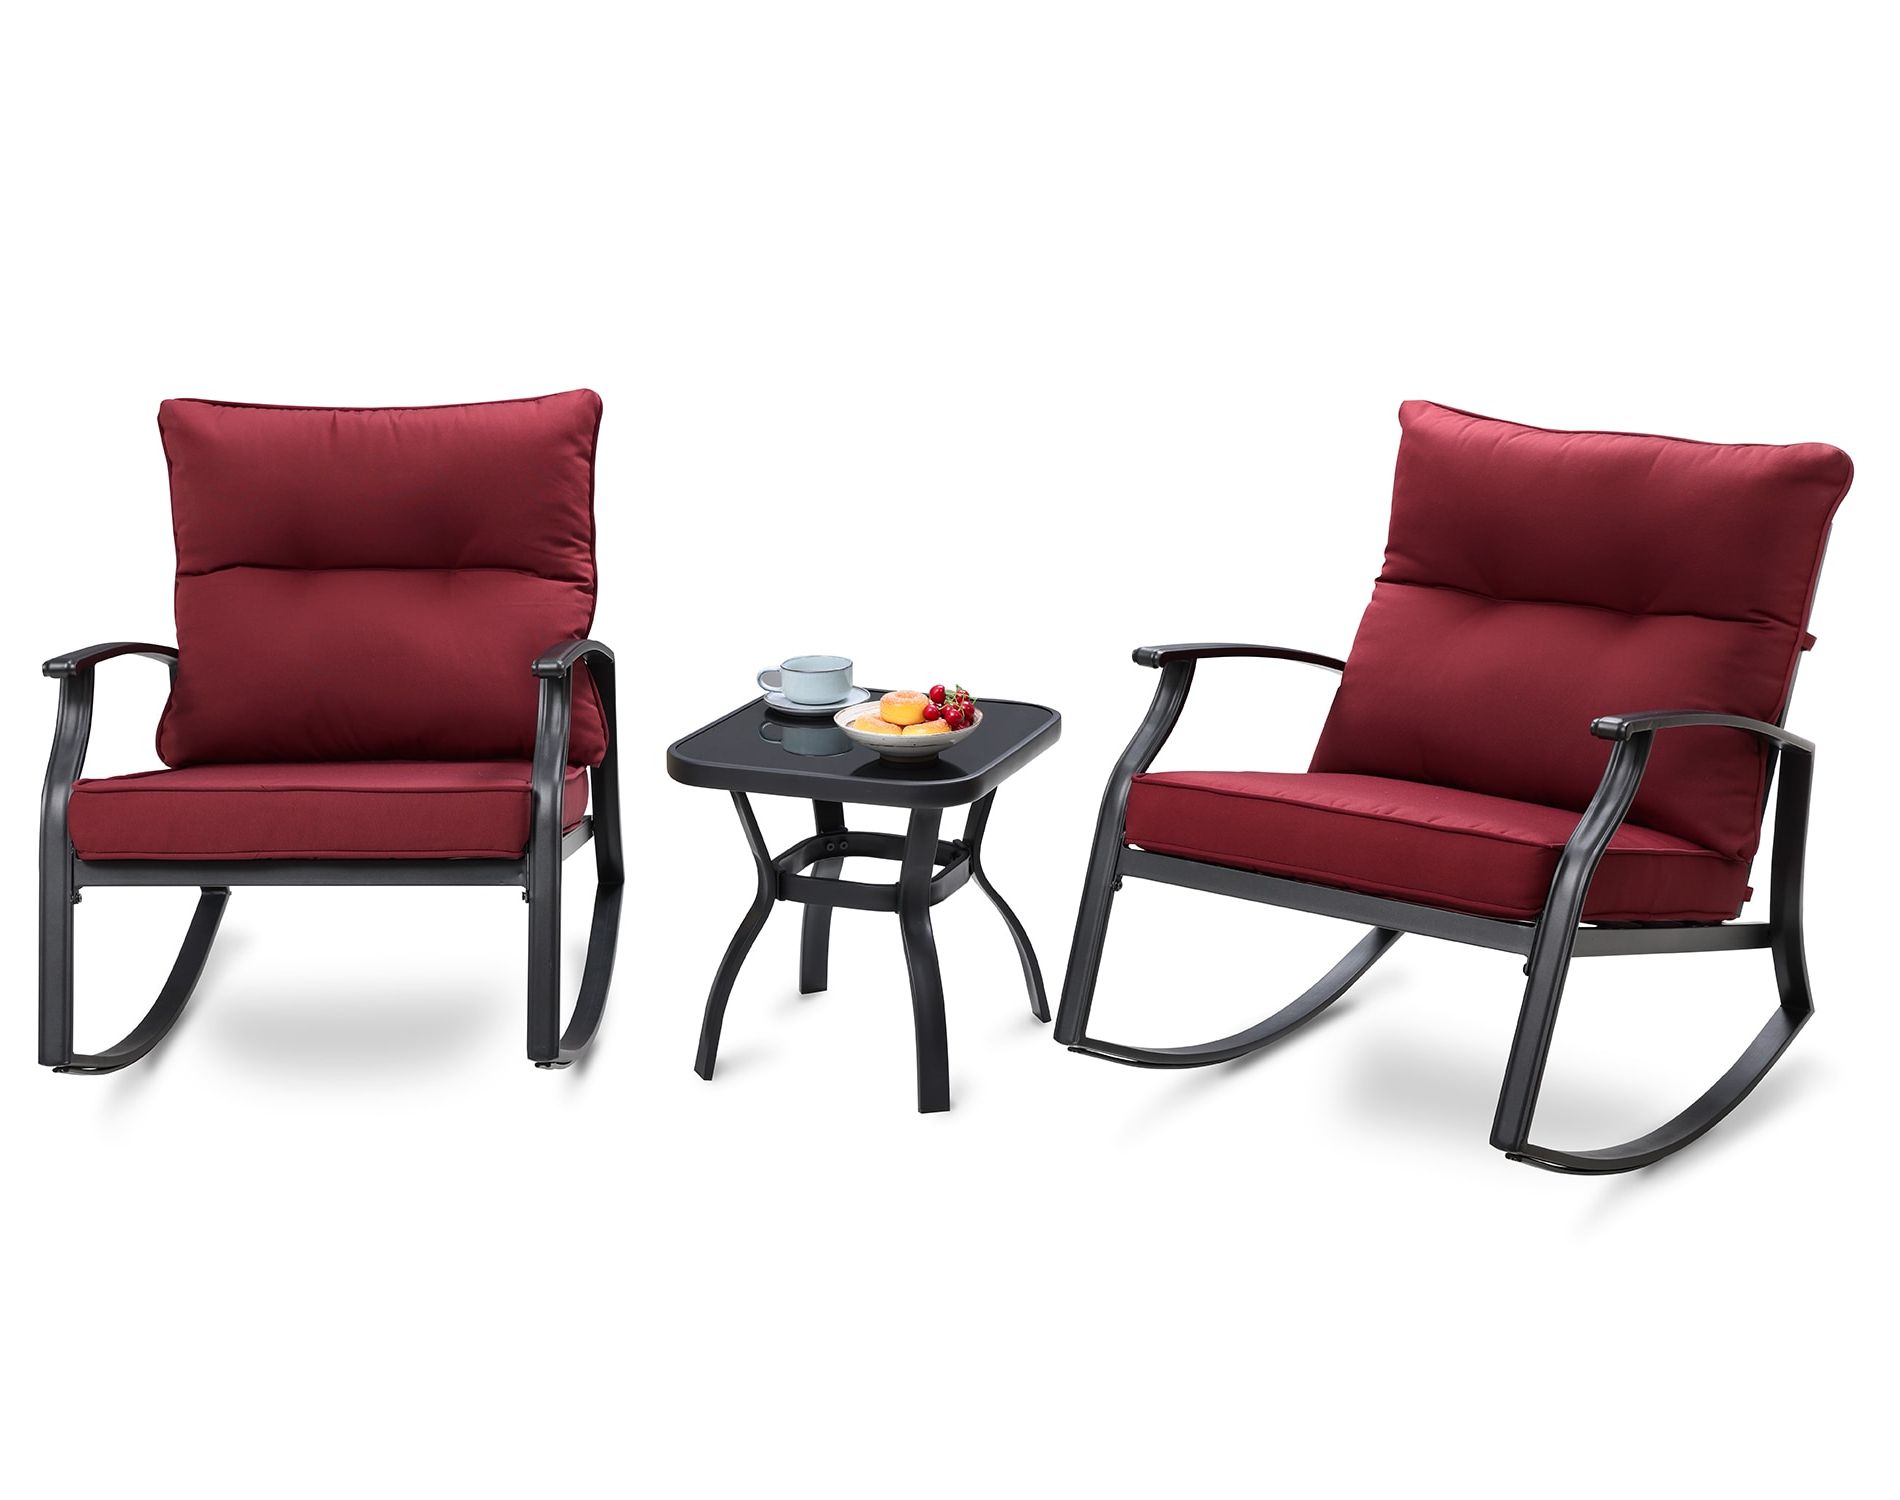 3 Piece Cushion Rocking Chair Set With Regard To Newest Clihome Patio Rocking Chair 3 Piece Patio Conversation Set With Red Cushions  In The Patio Conversation Sets Department At Lowes (View 14 of 15)